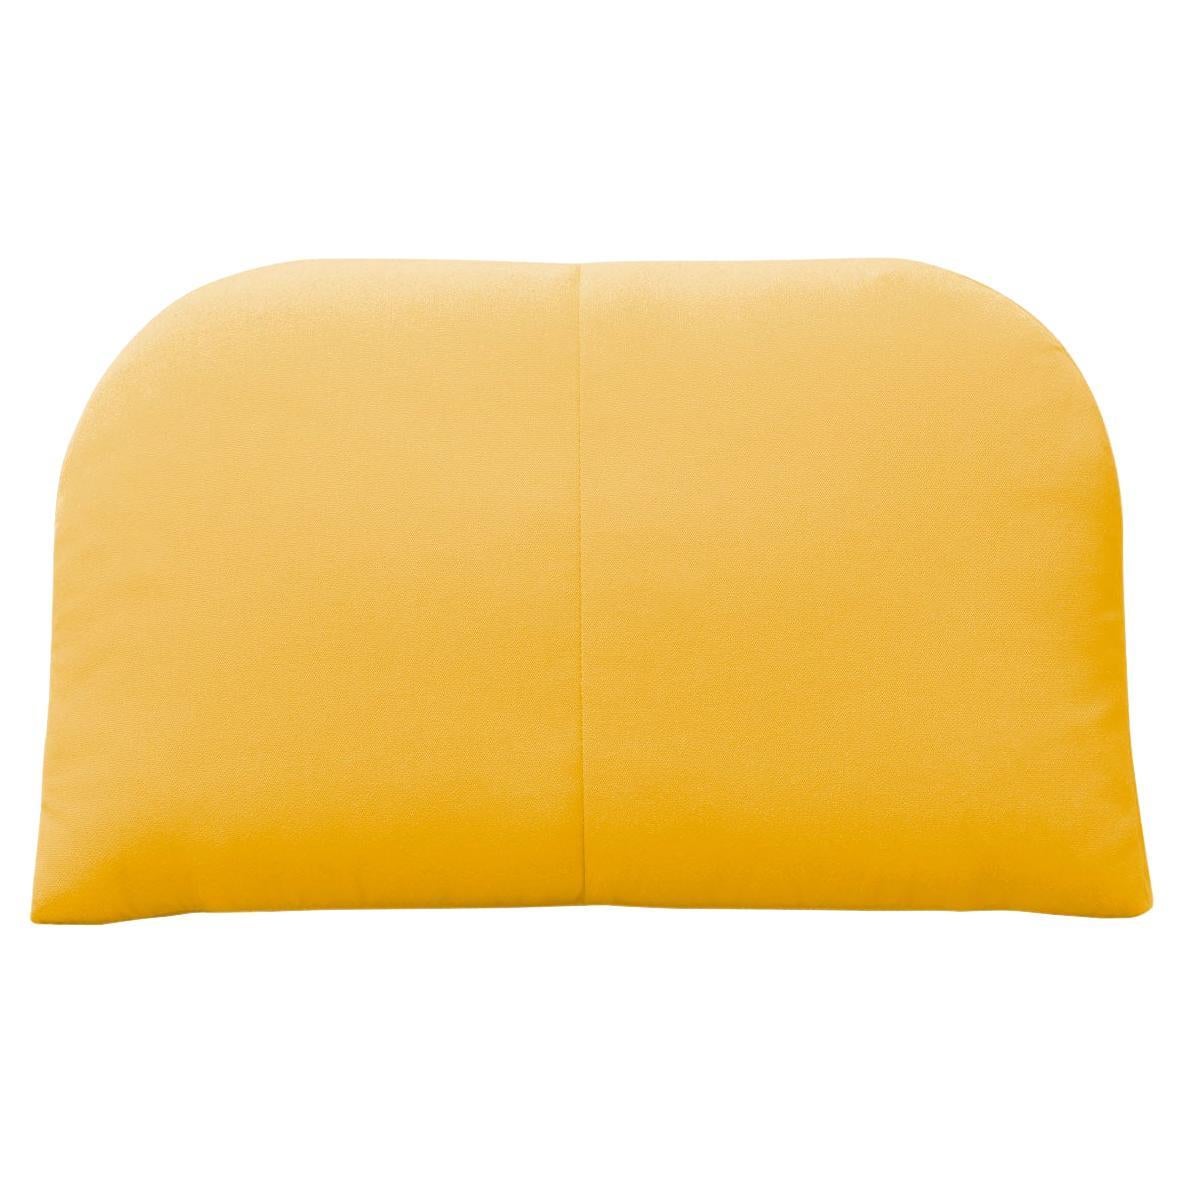 Bend Goods - Arc Throw Pillow in Yellow Sunbrella For Sale